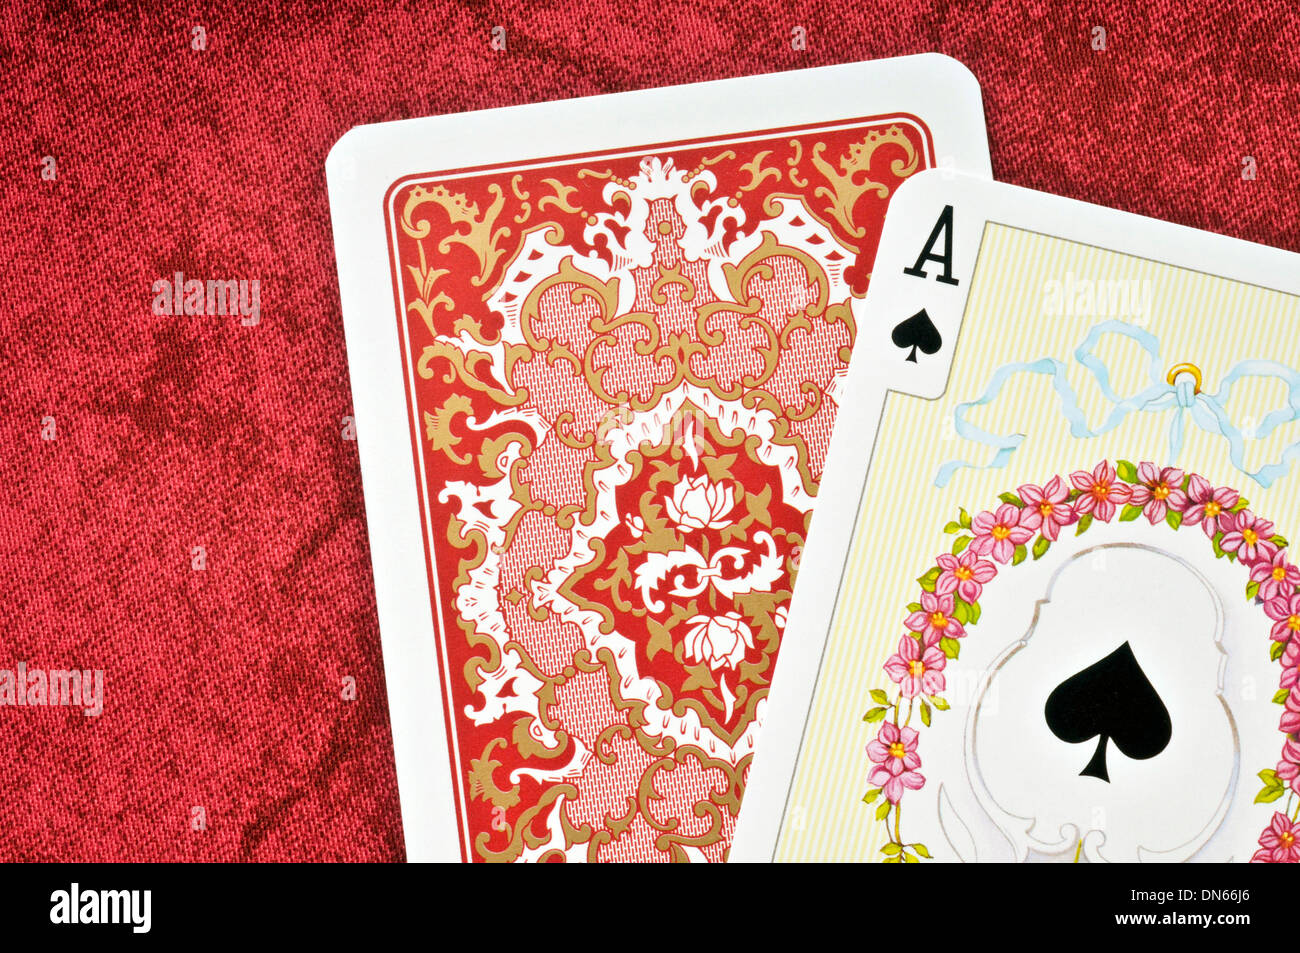 ace of Spades playing card Stock Photo